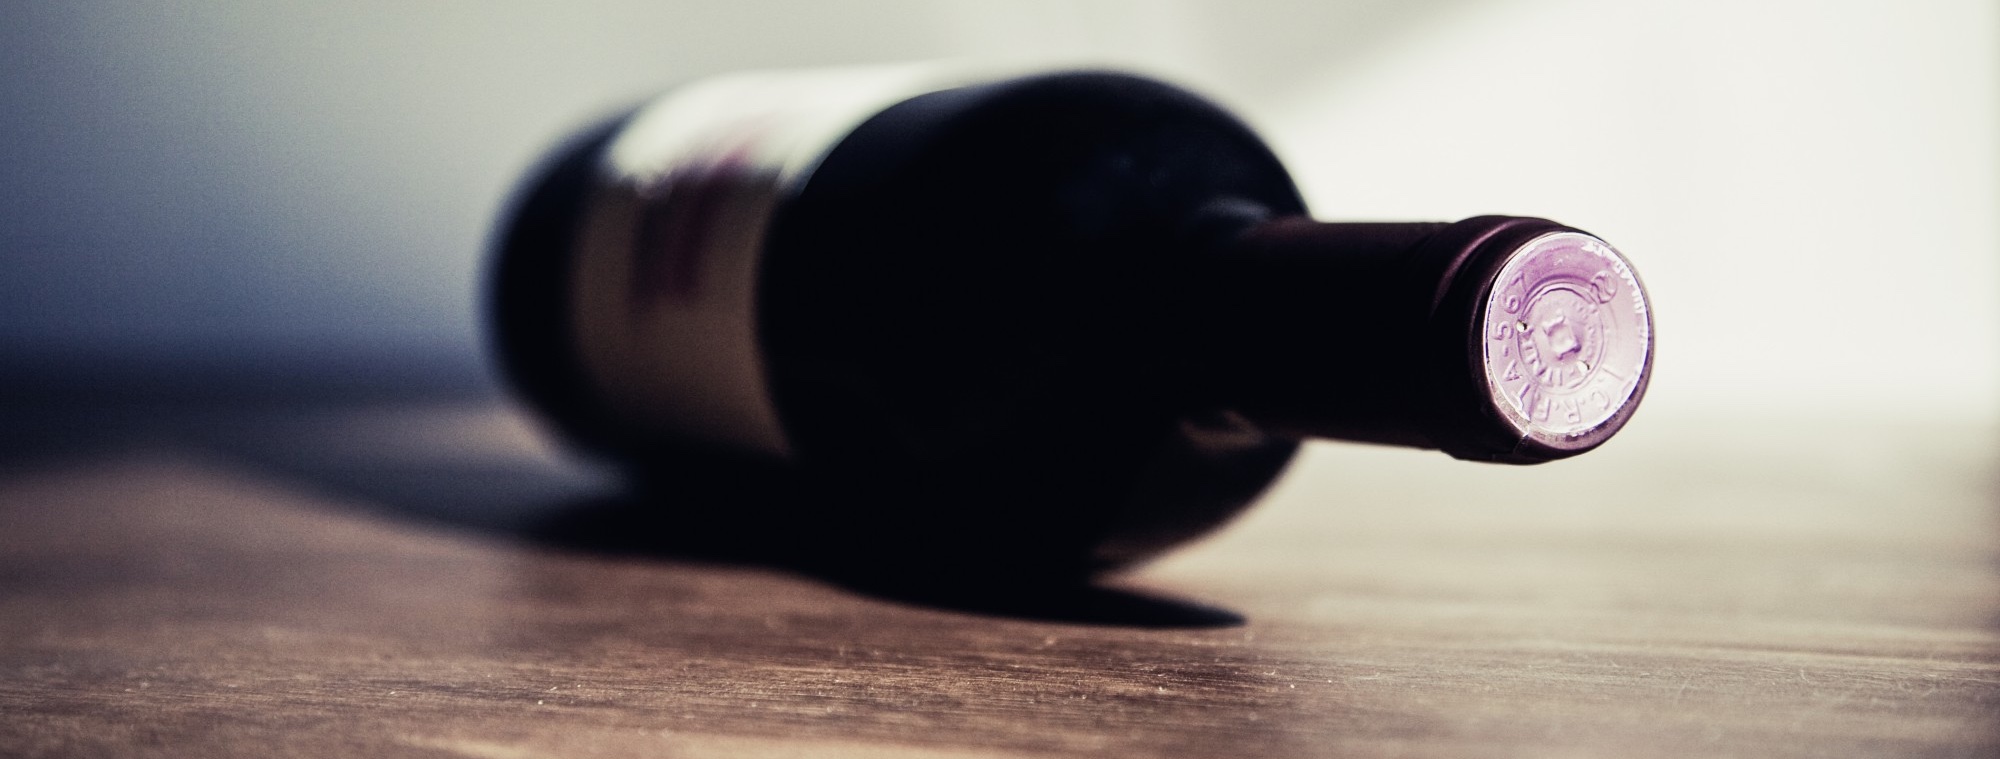 A bottle of red wine on a table